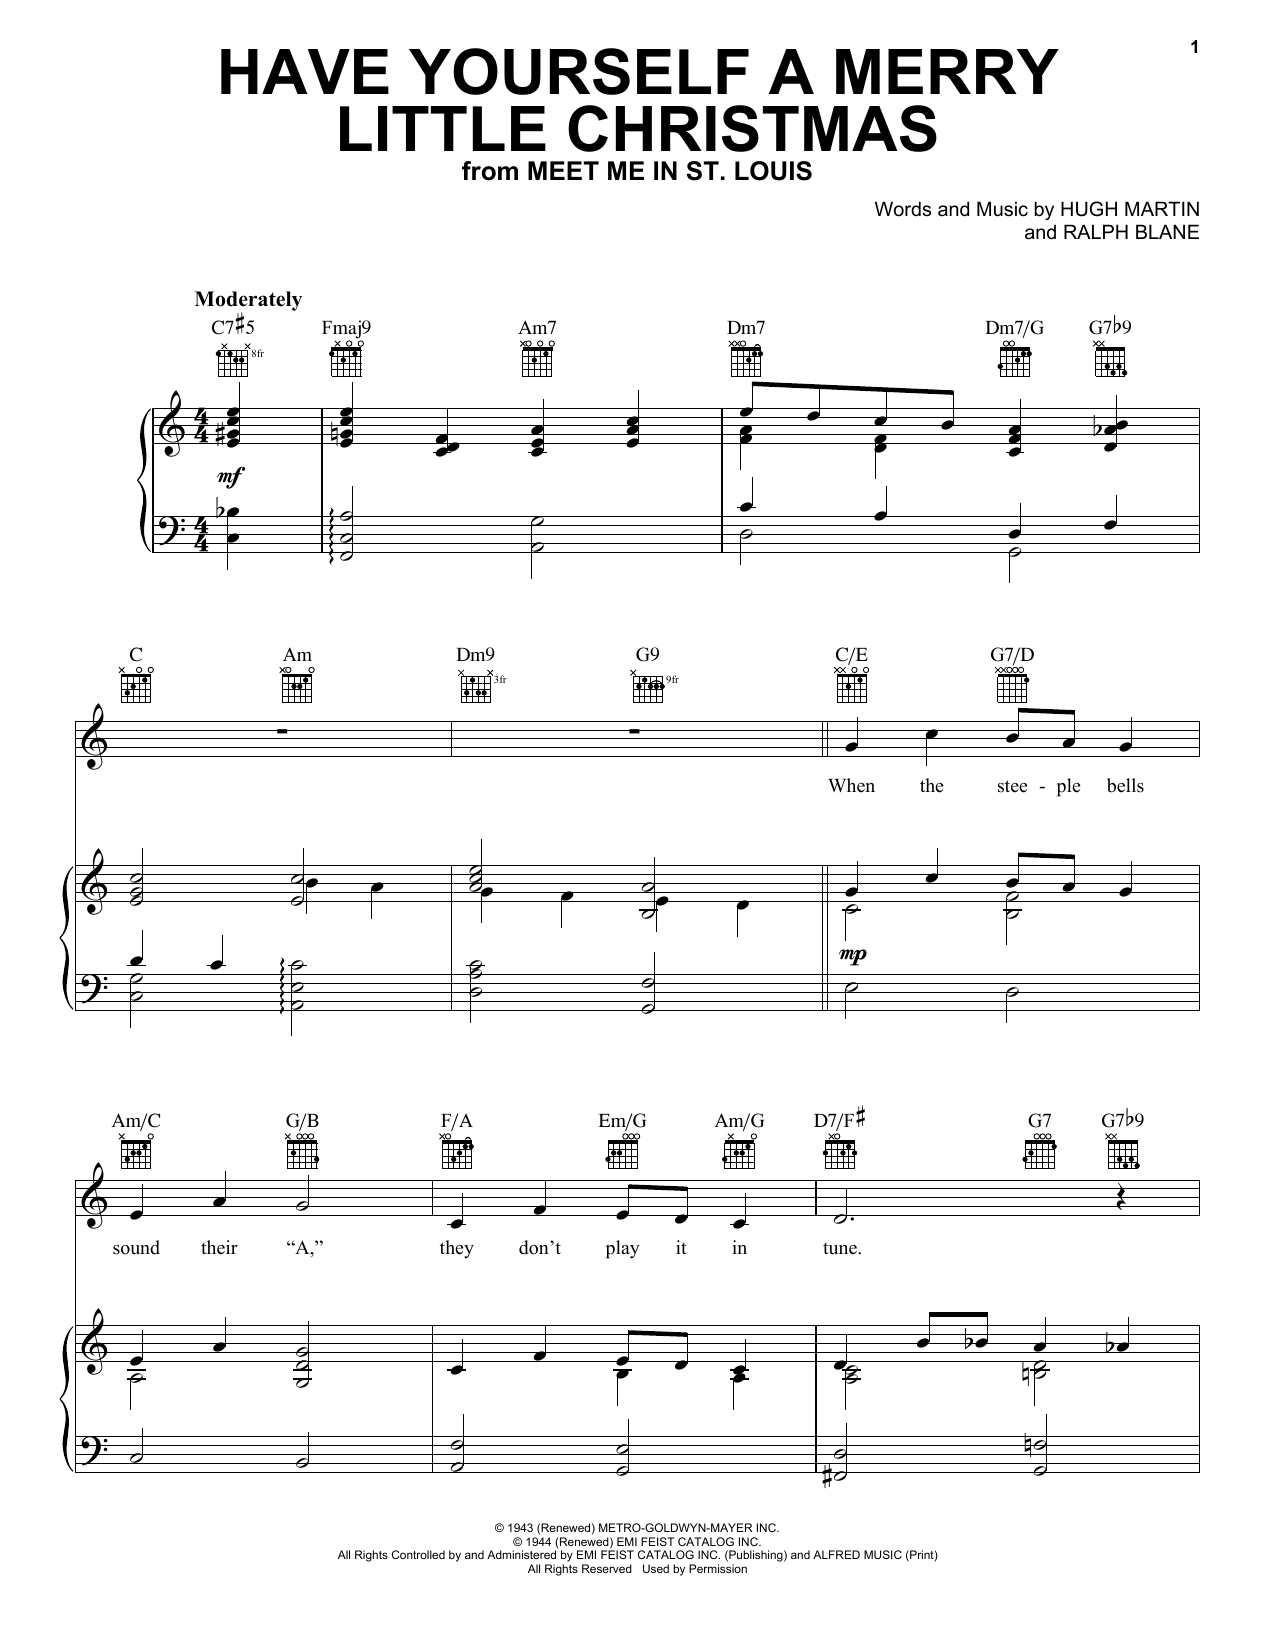 Download Frank Sinatra Have Yourself A Merry Little Christmas Sheet Music